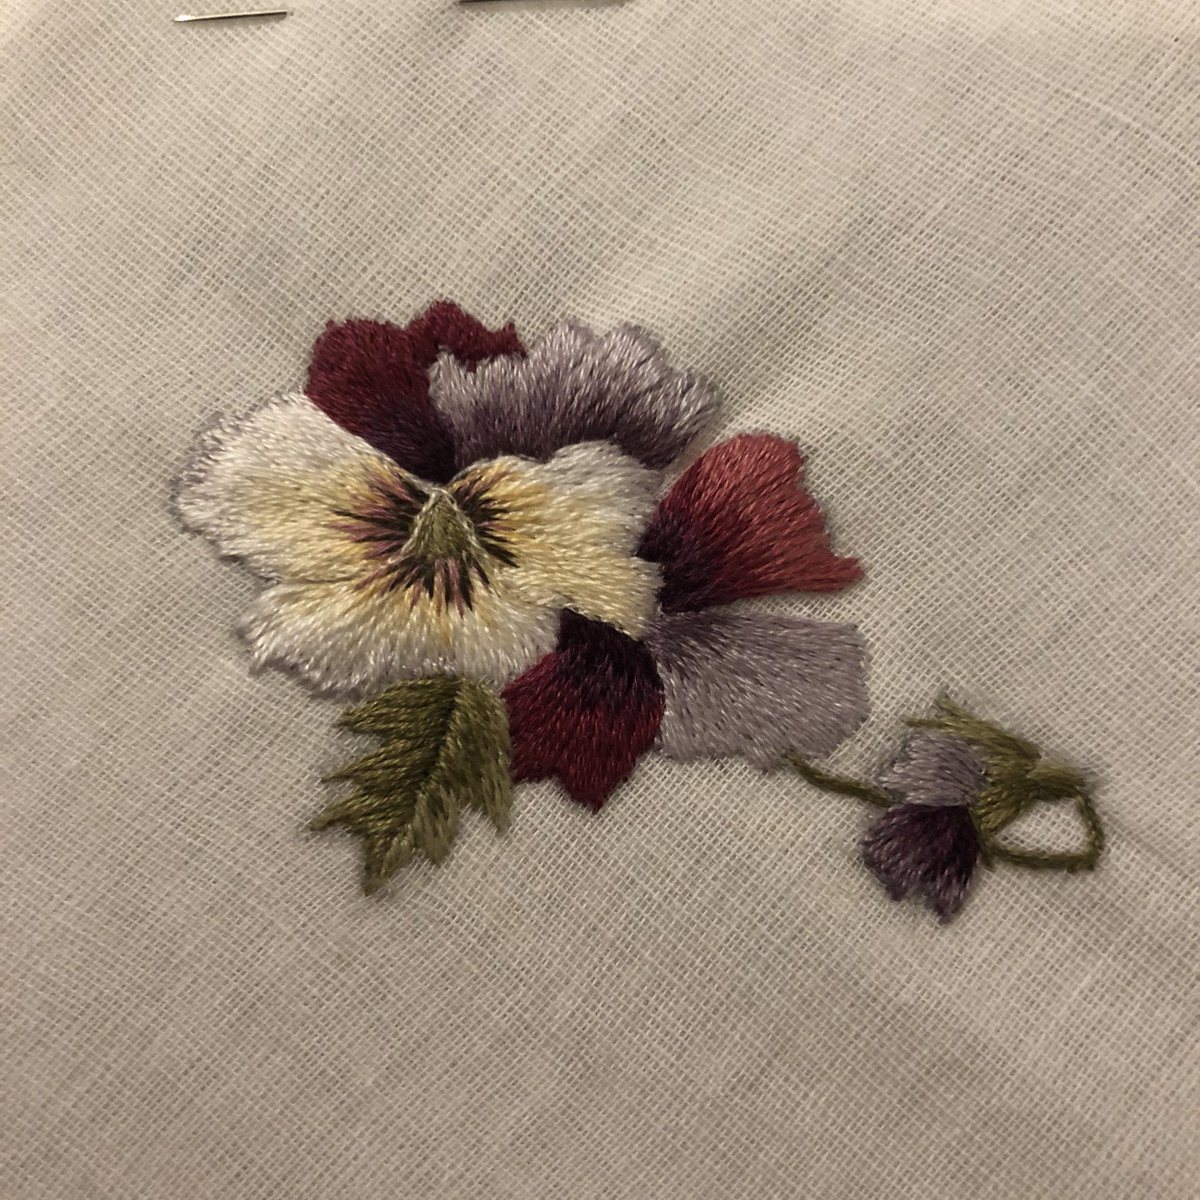 Colours don’t really show on account of it being permanently dark right now but I stitched a pansy and it looks reasonably pansy like. #needlework #embroidery #needlepainting